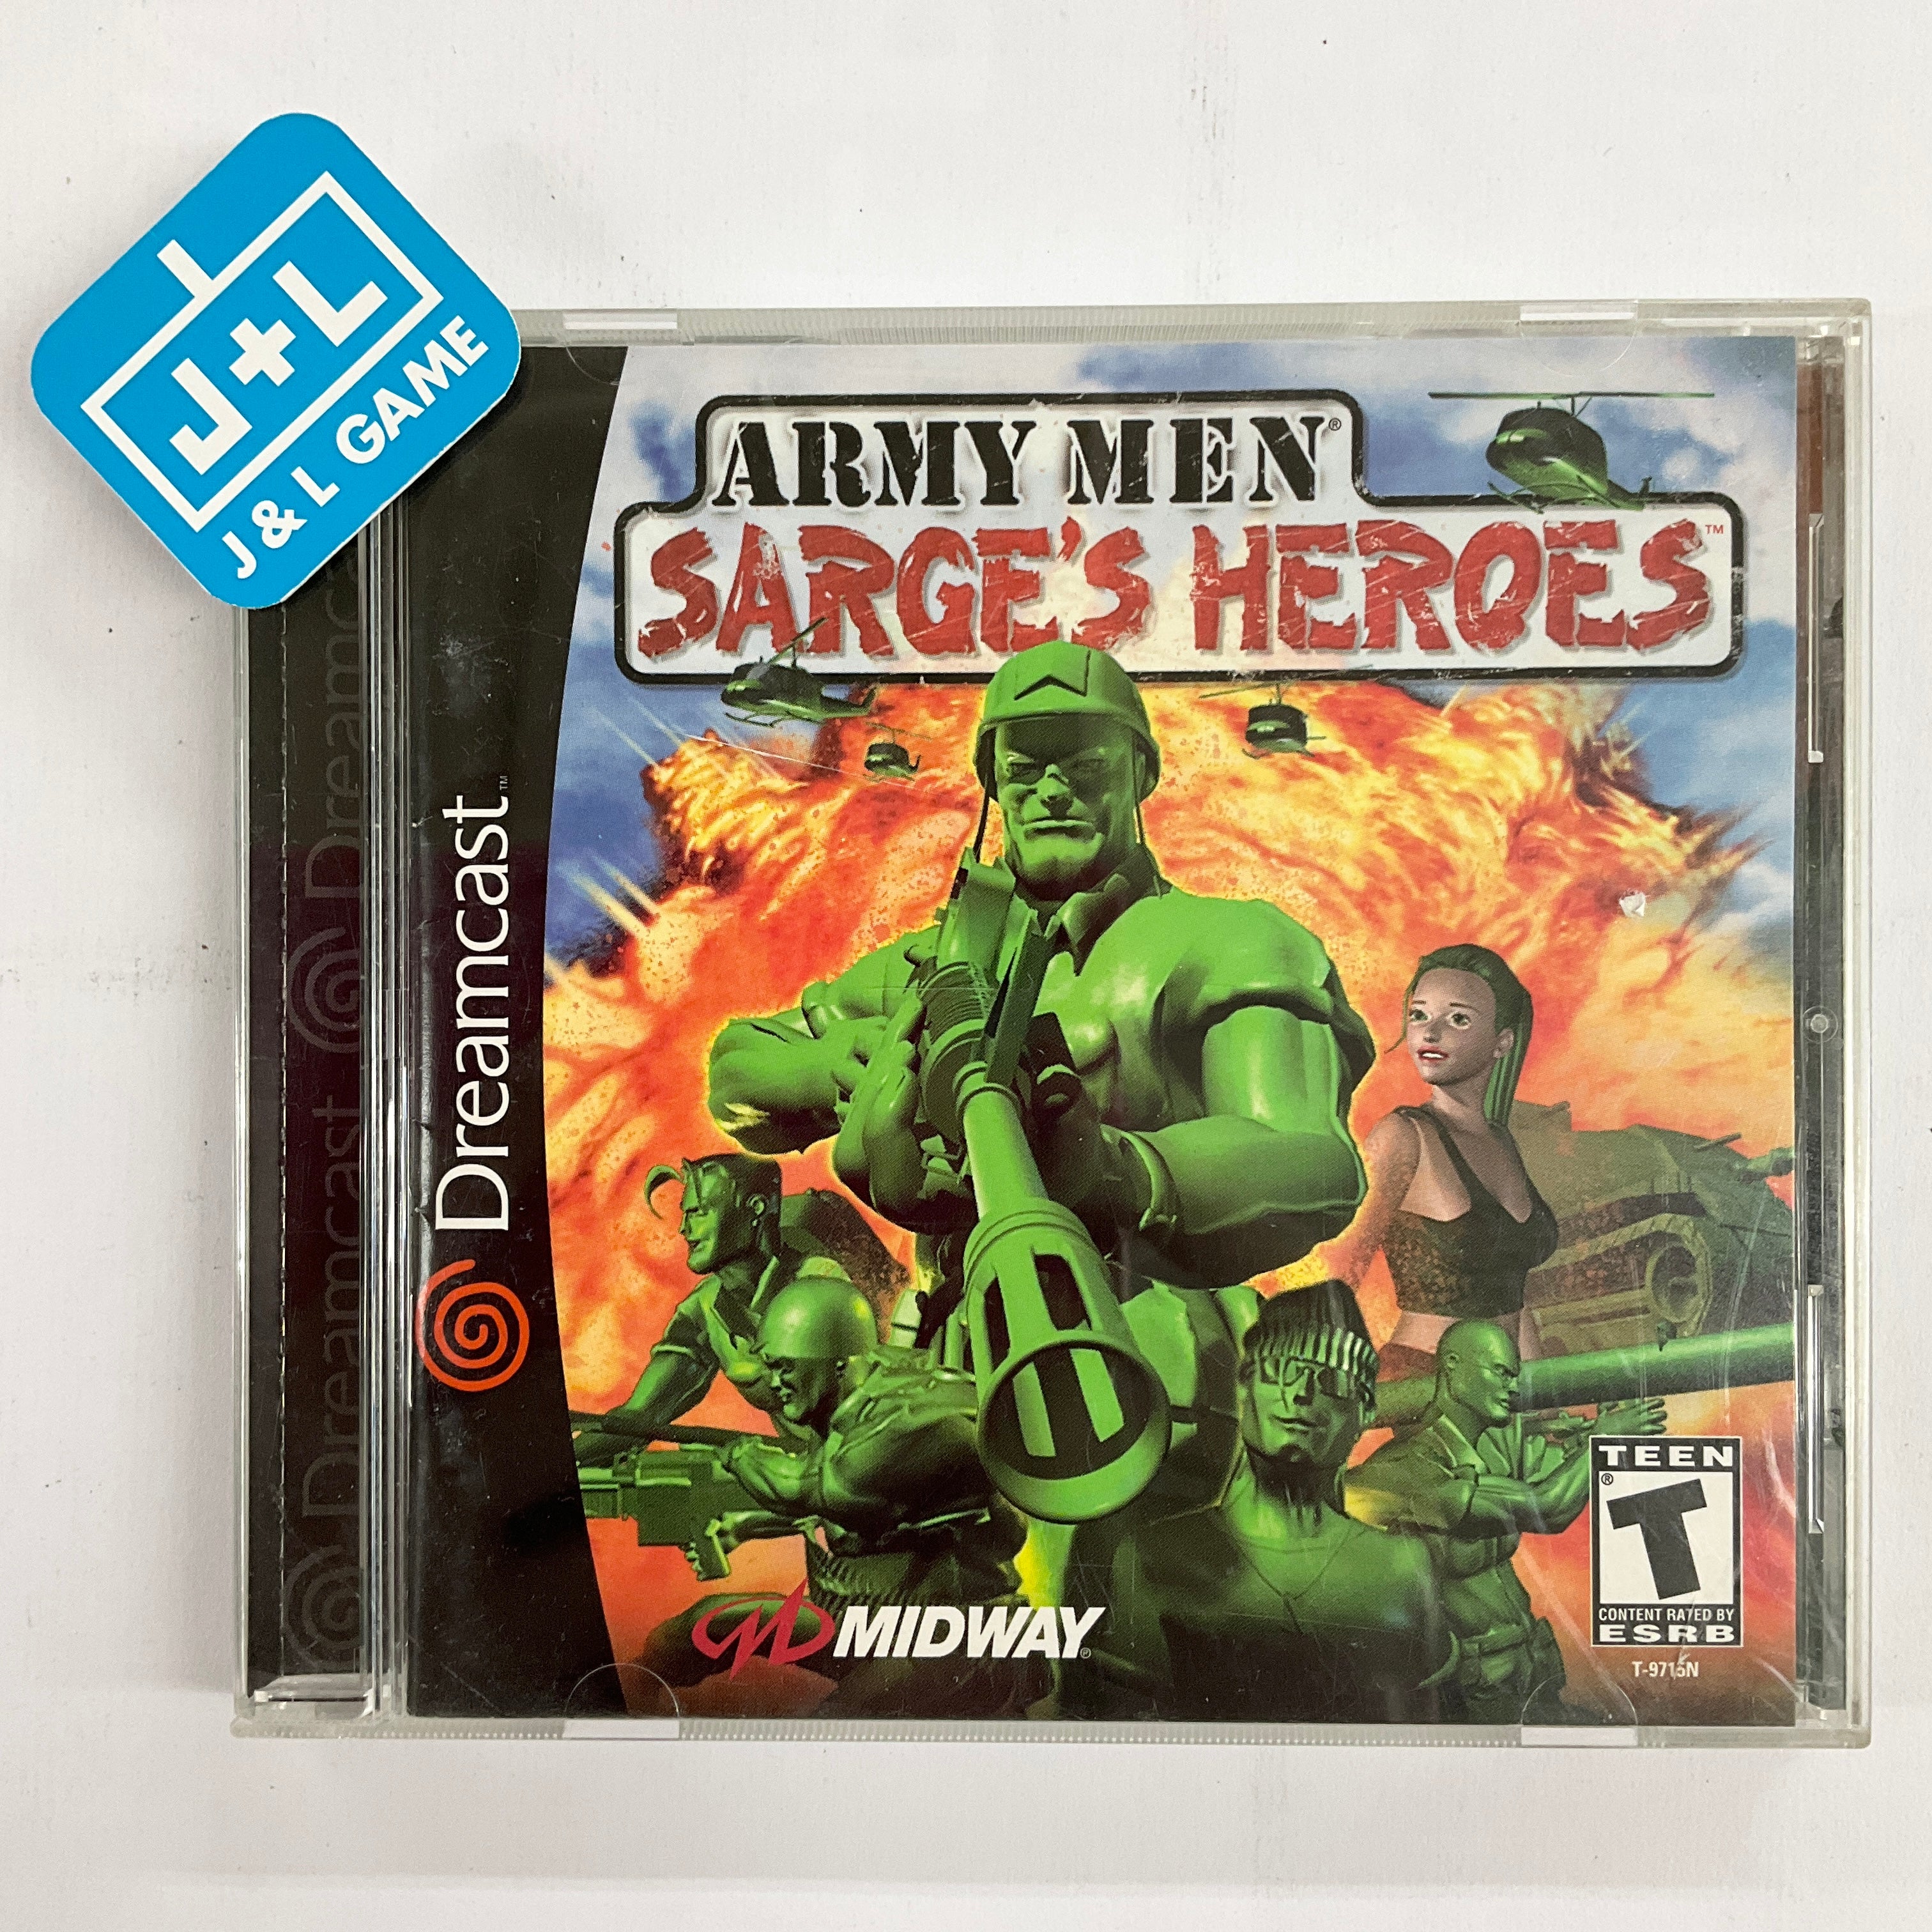 Army Men: Sarge's Heroes [Dreamcast Game]